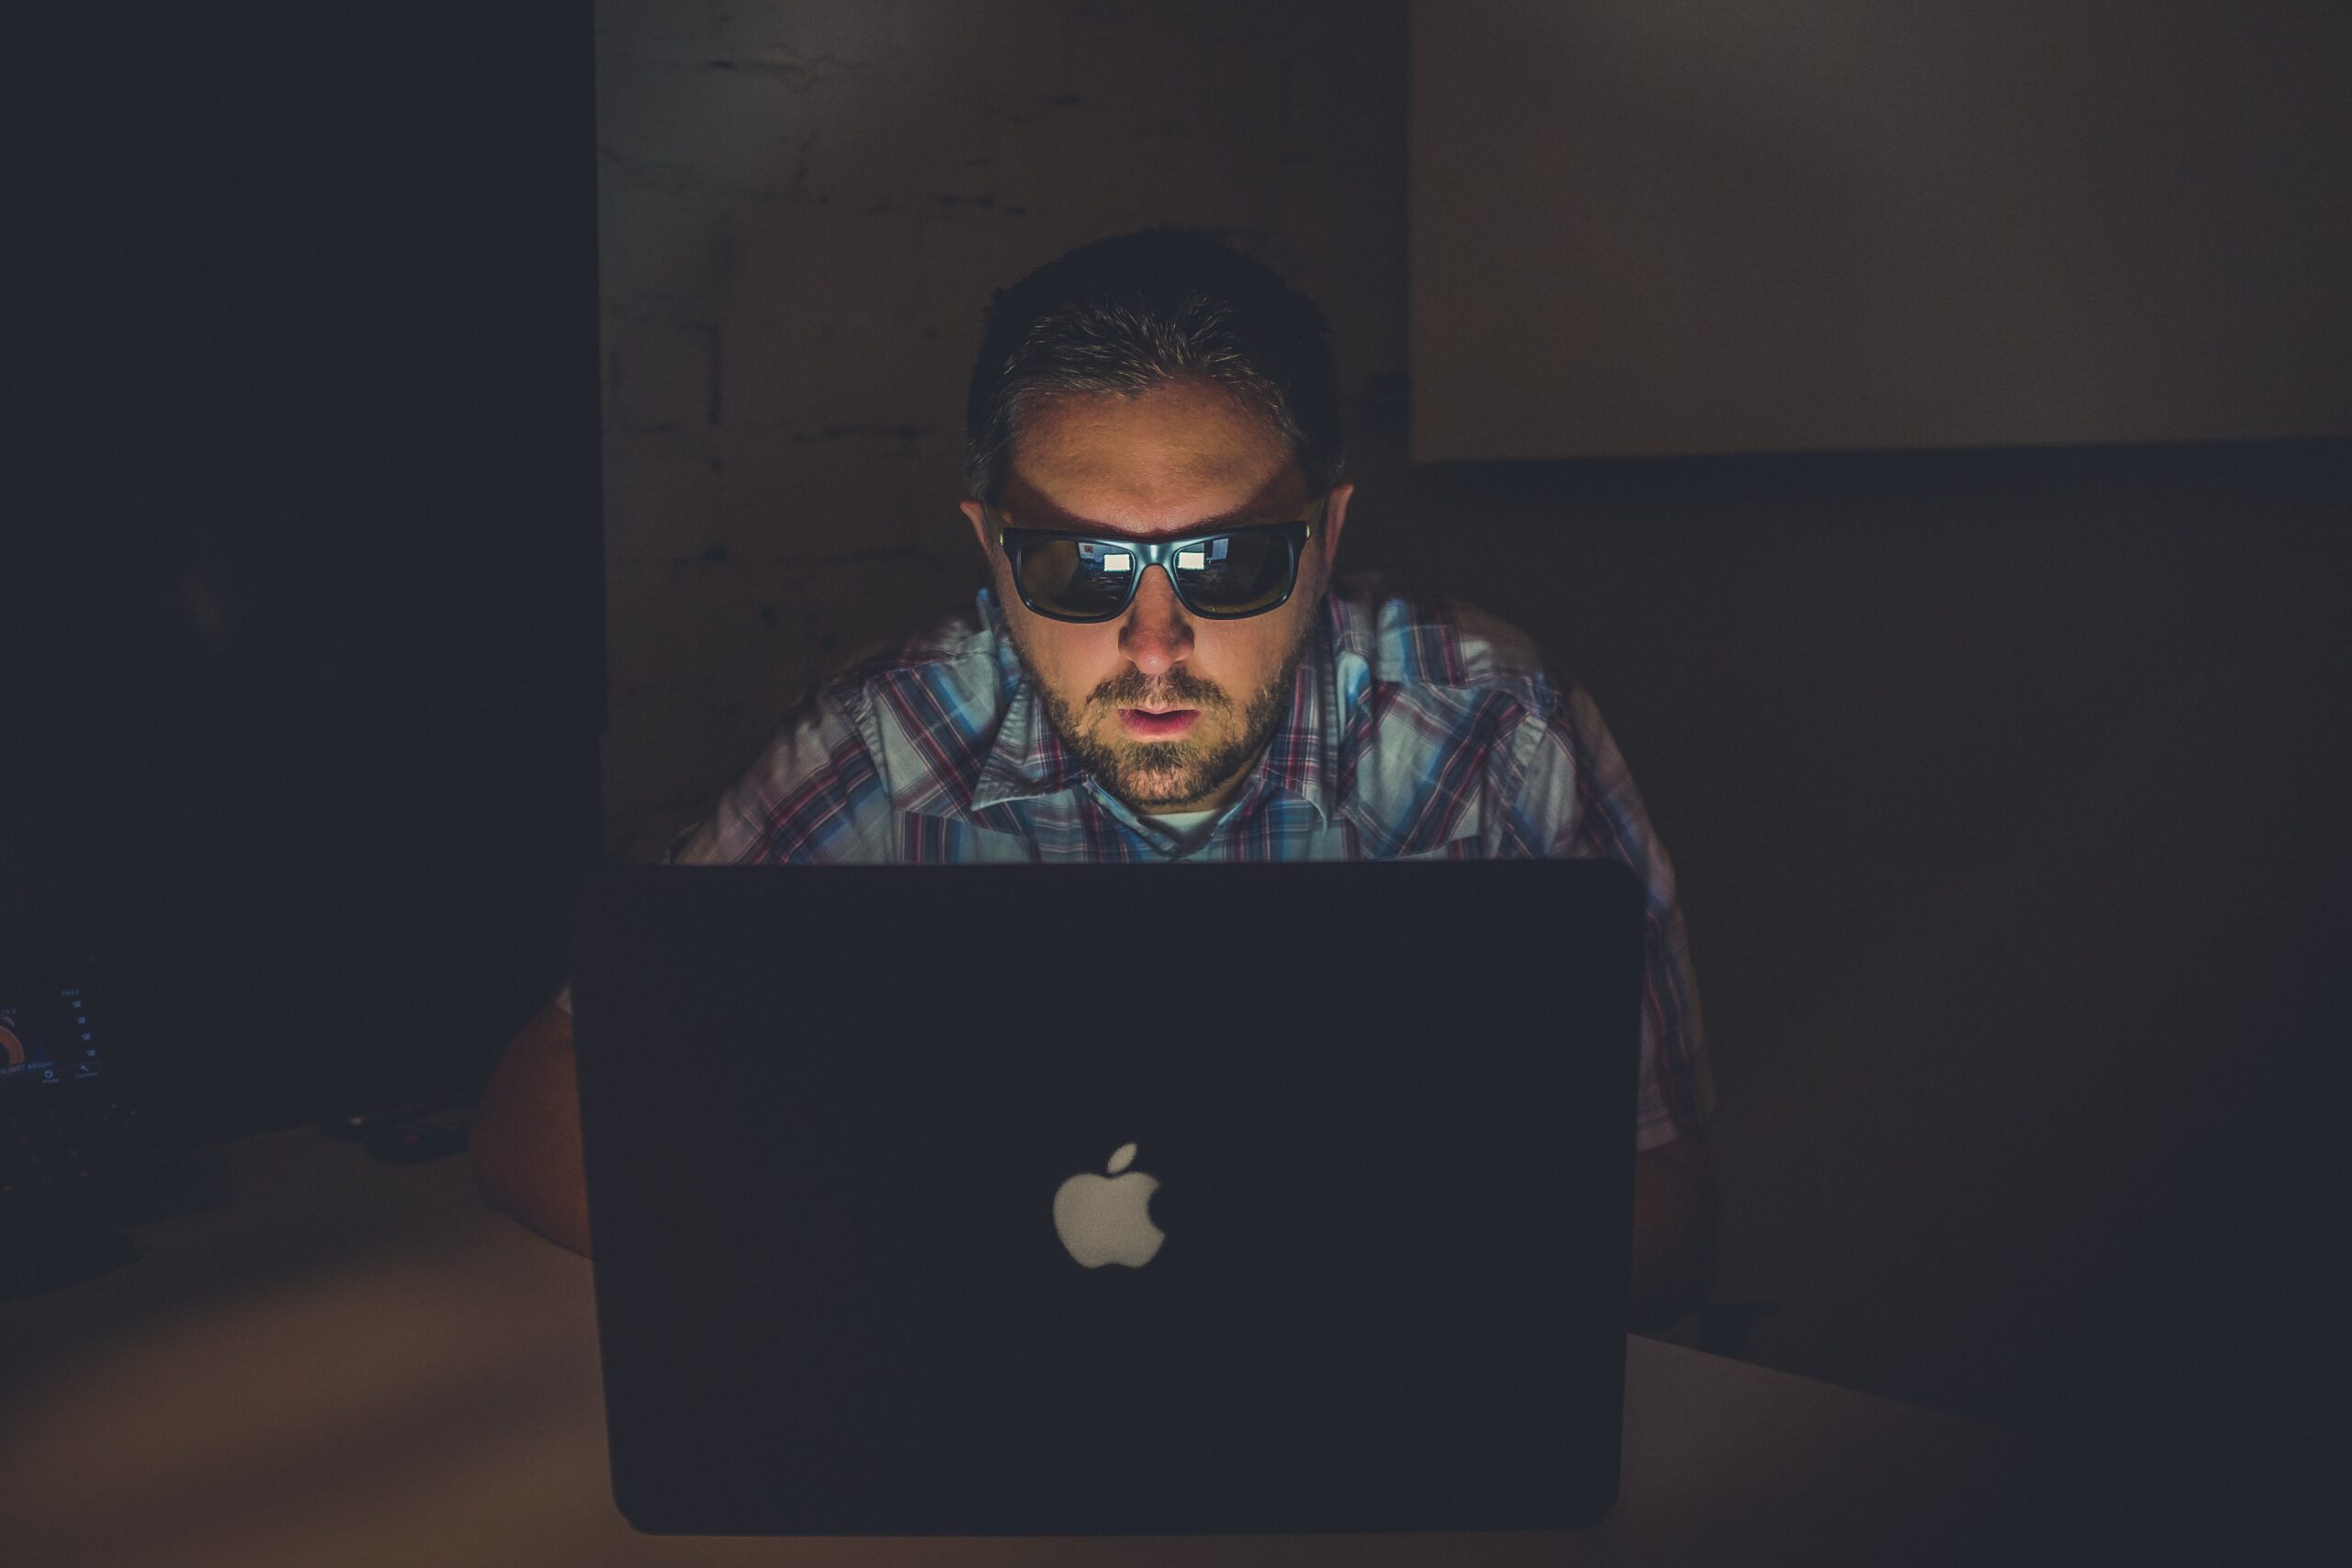 Man wearing sunglasses in front of a laptop in a dark room